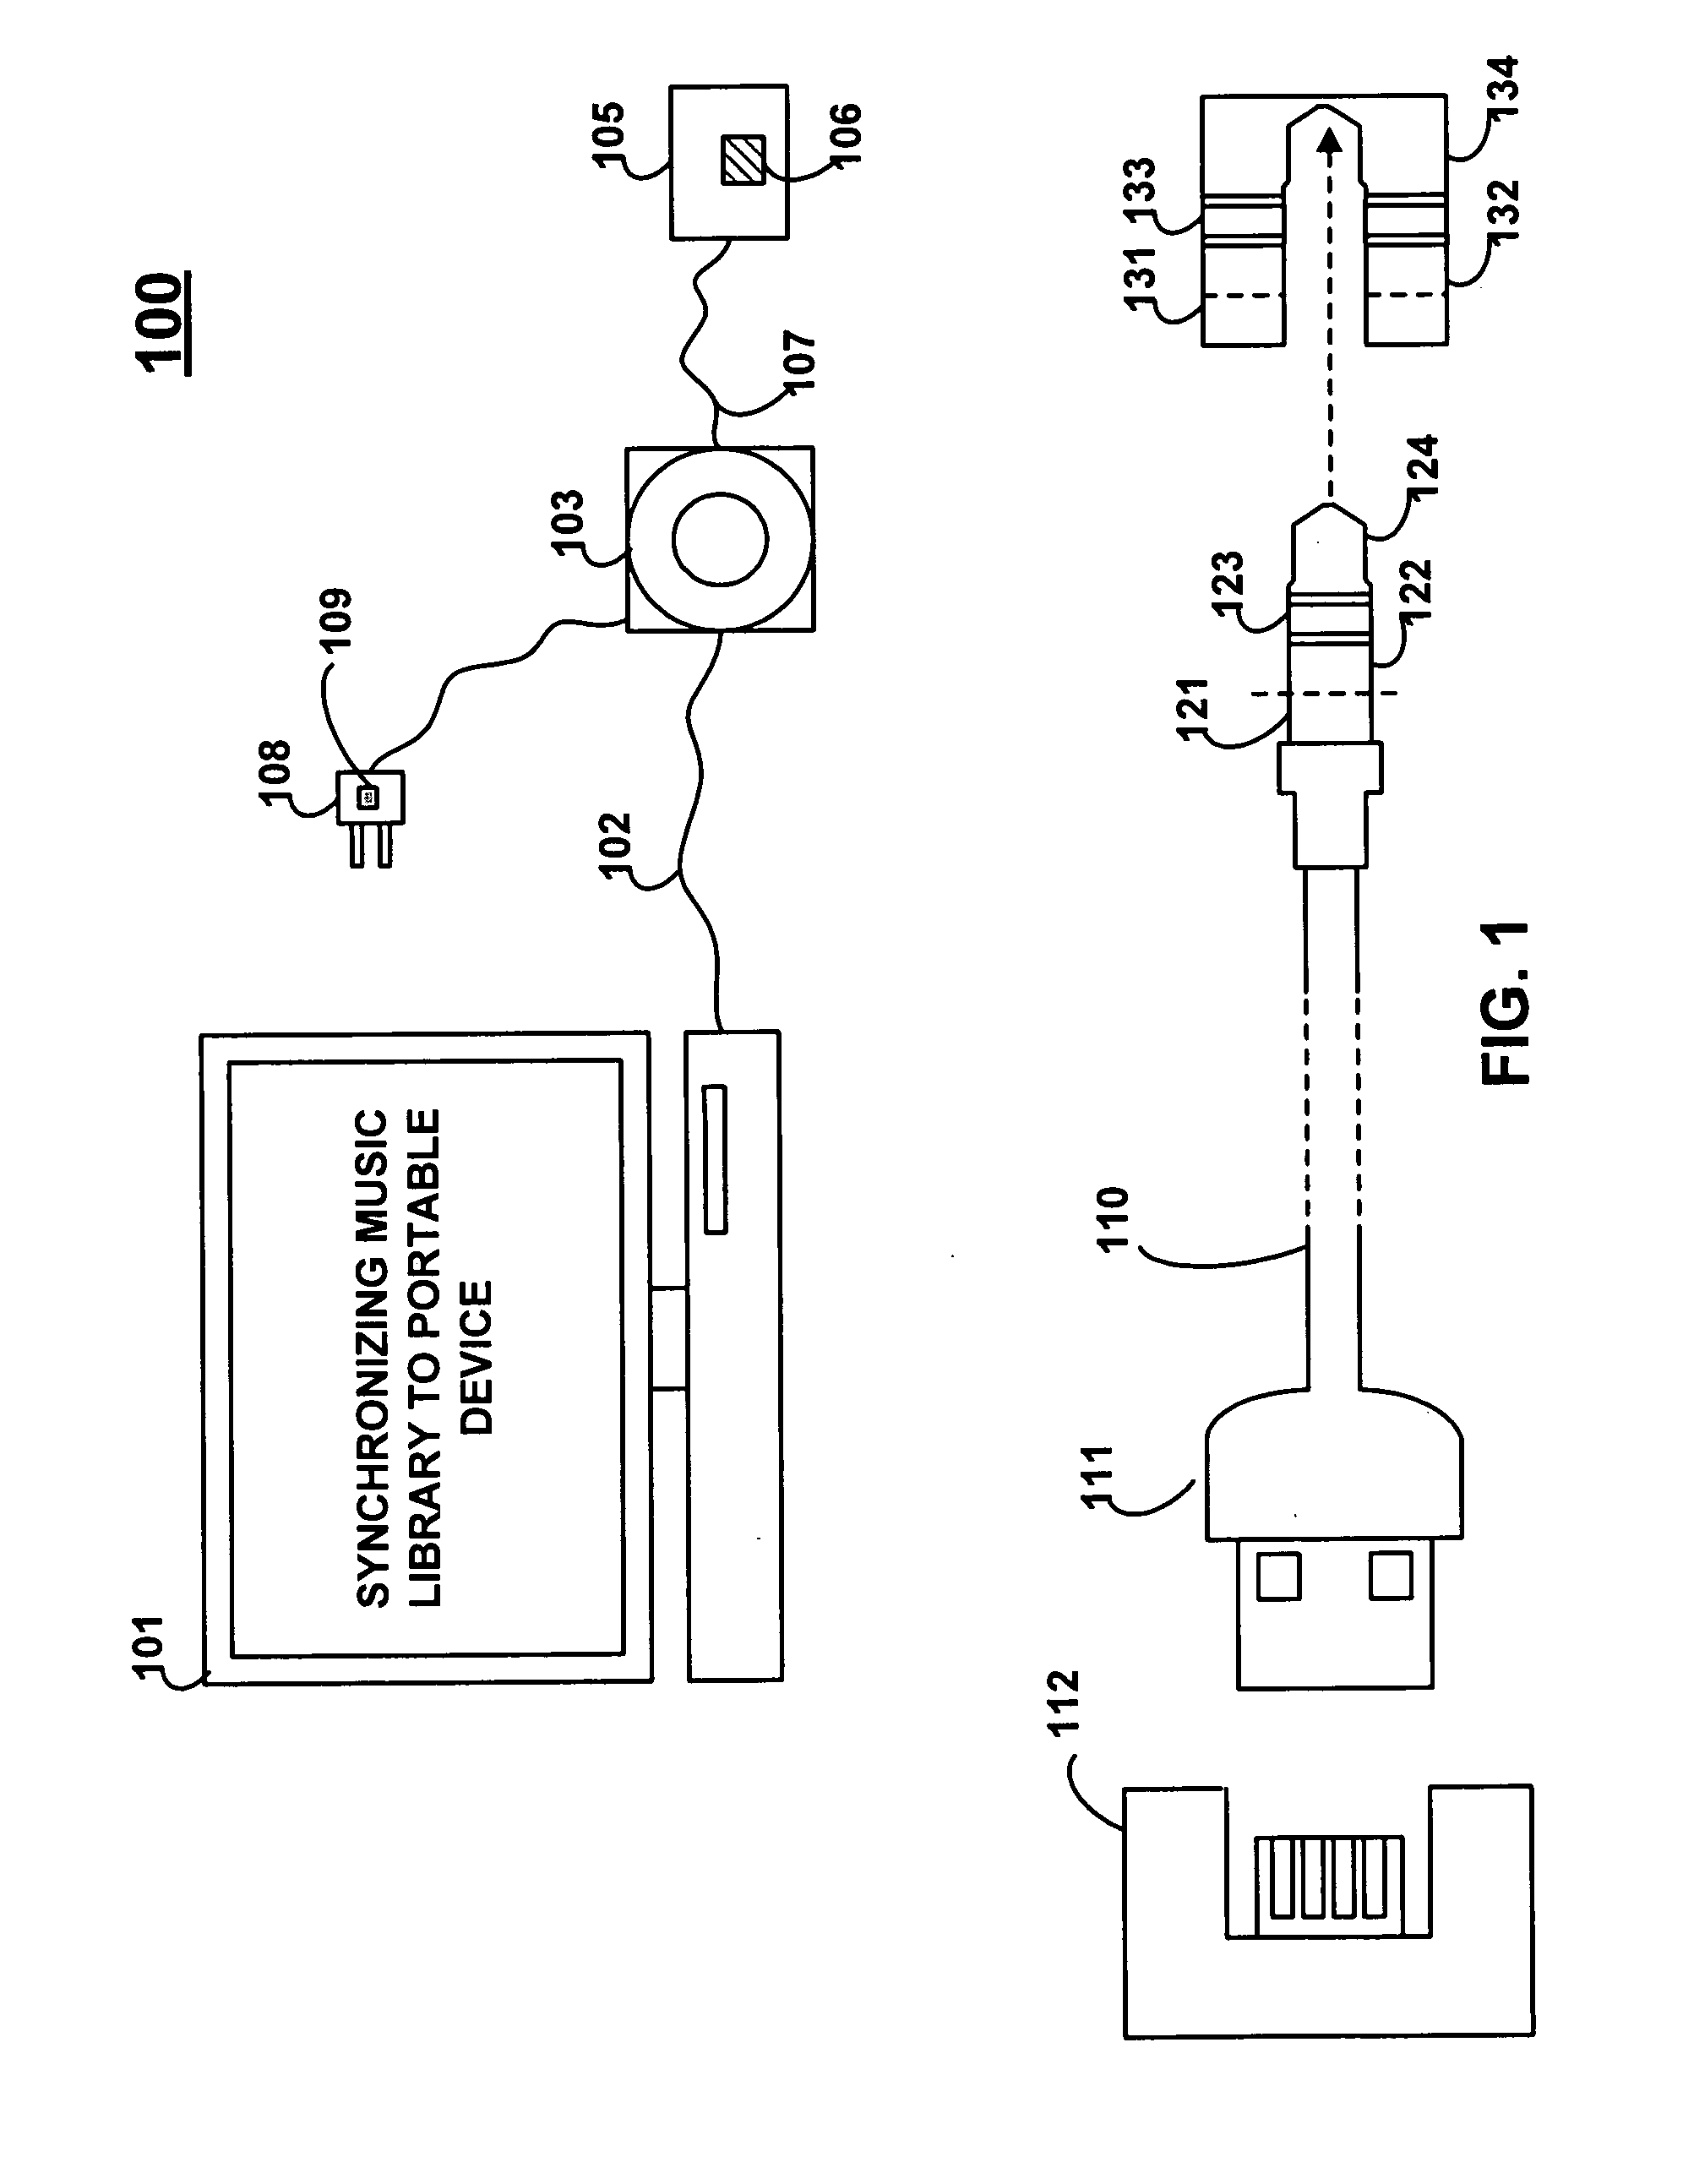 Systems and methods for providing device-to-device handshaking through a power supply signal